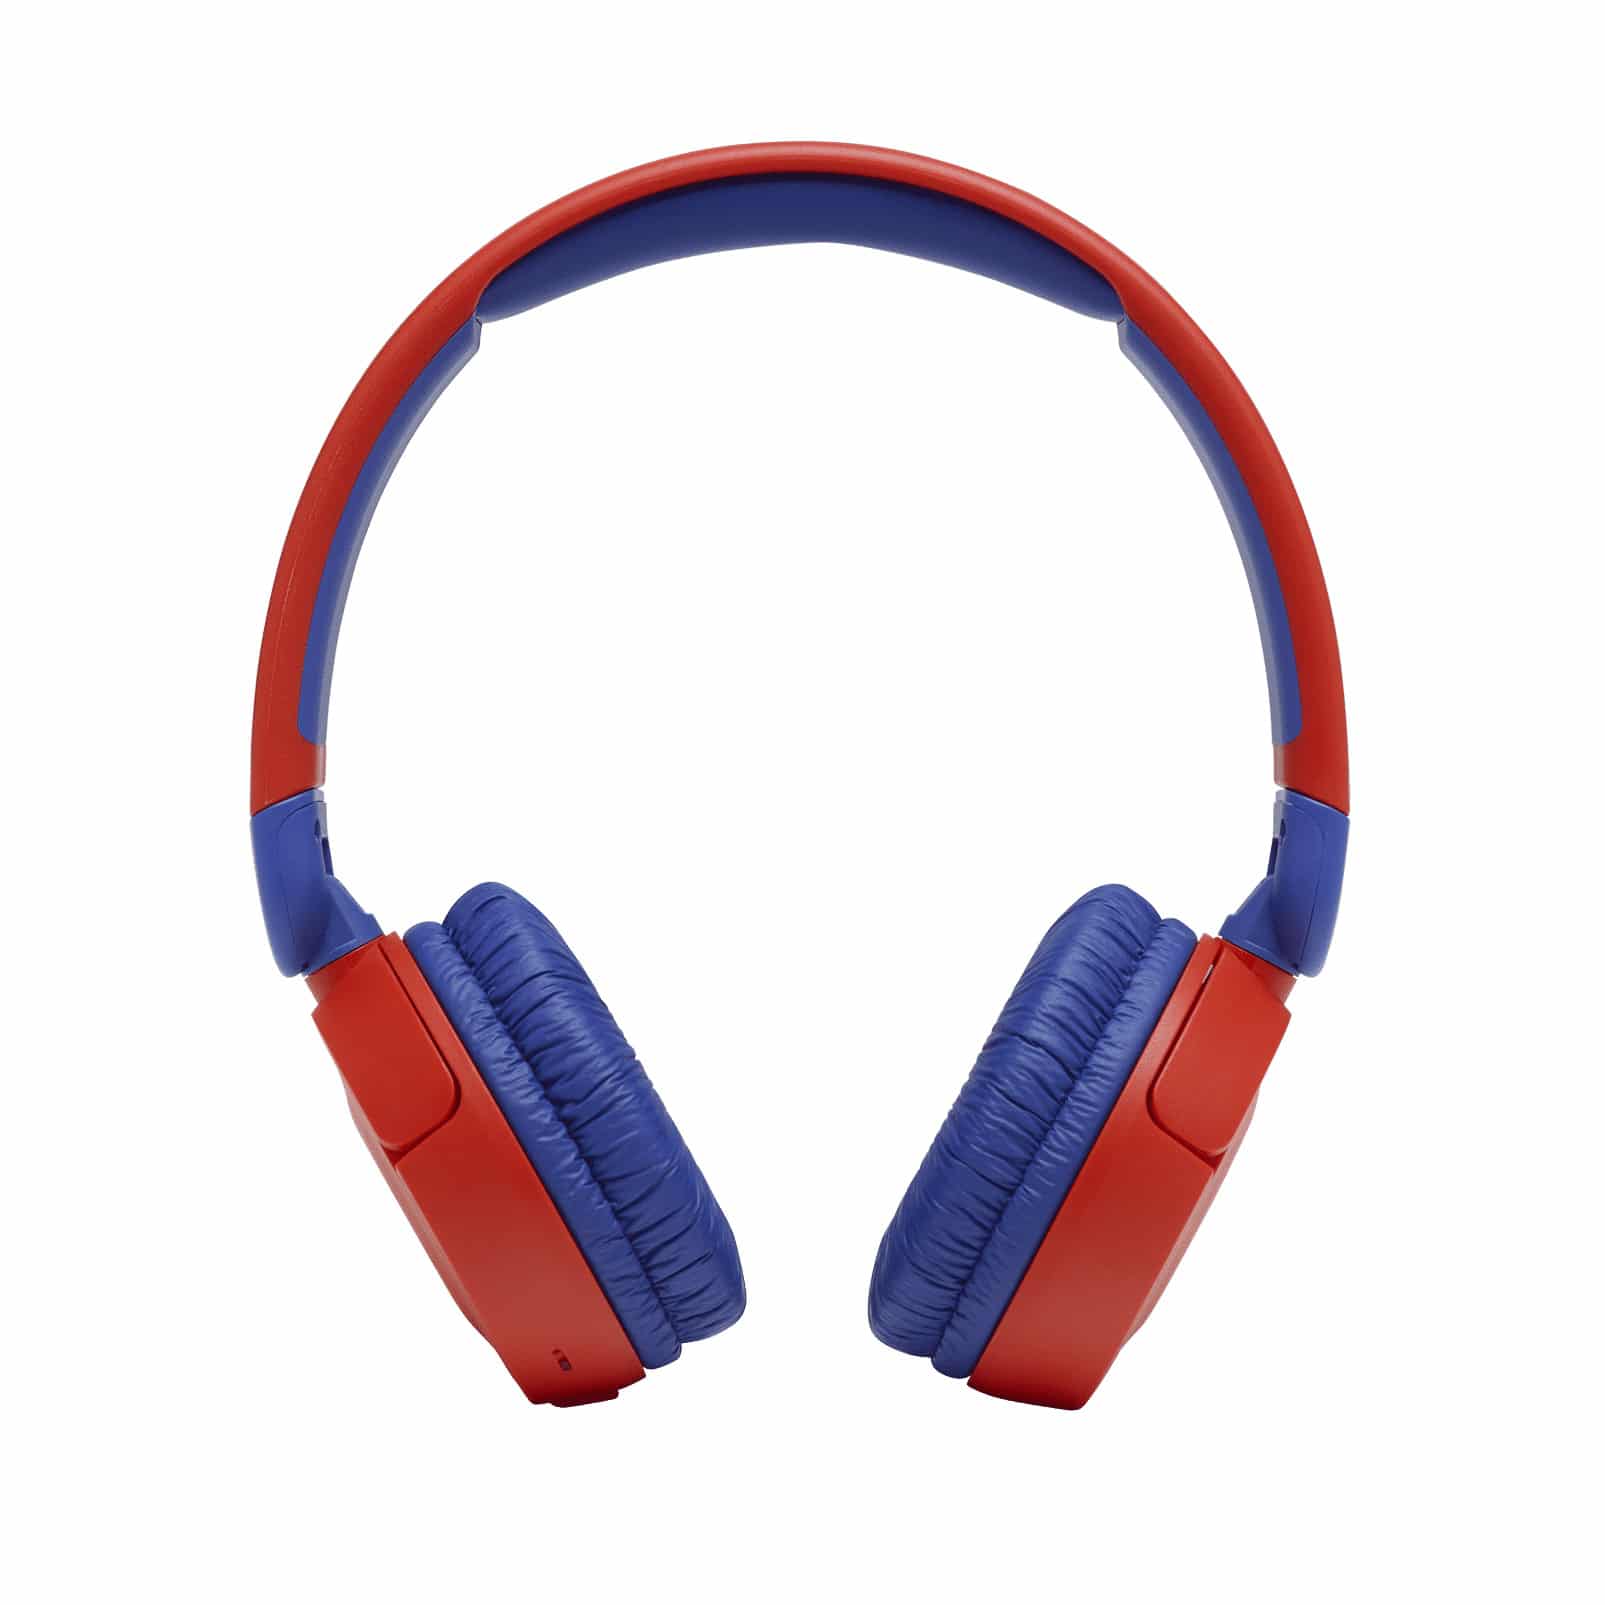 JBL Headphones with Bluetooth for Kids in red